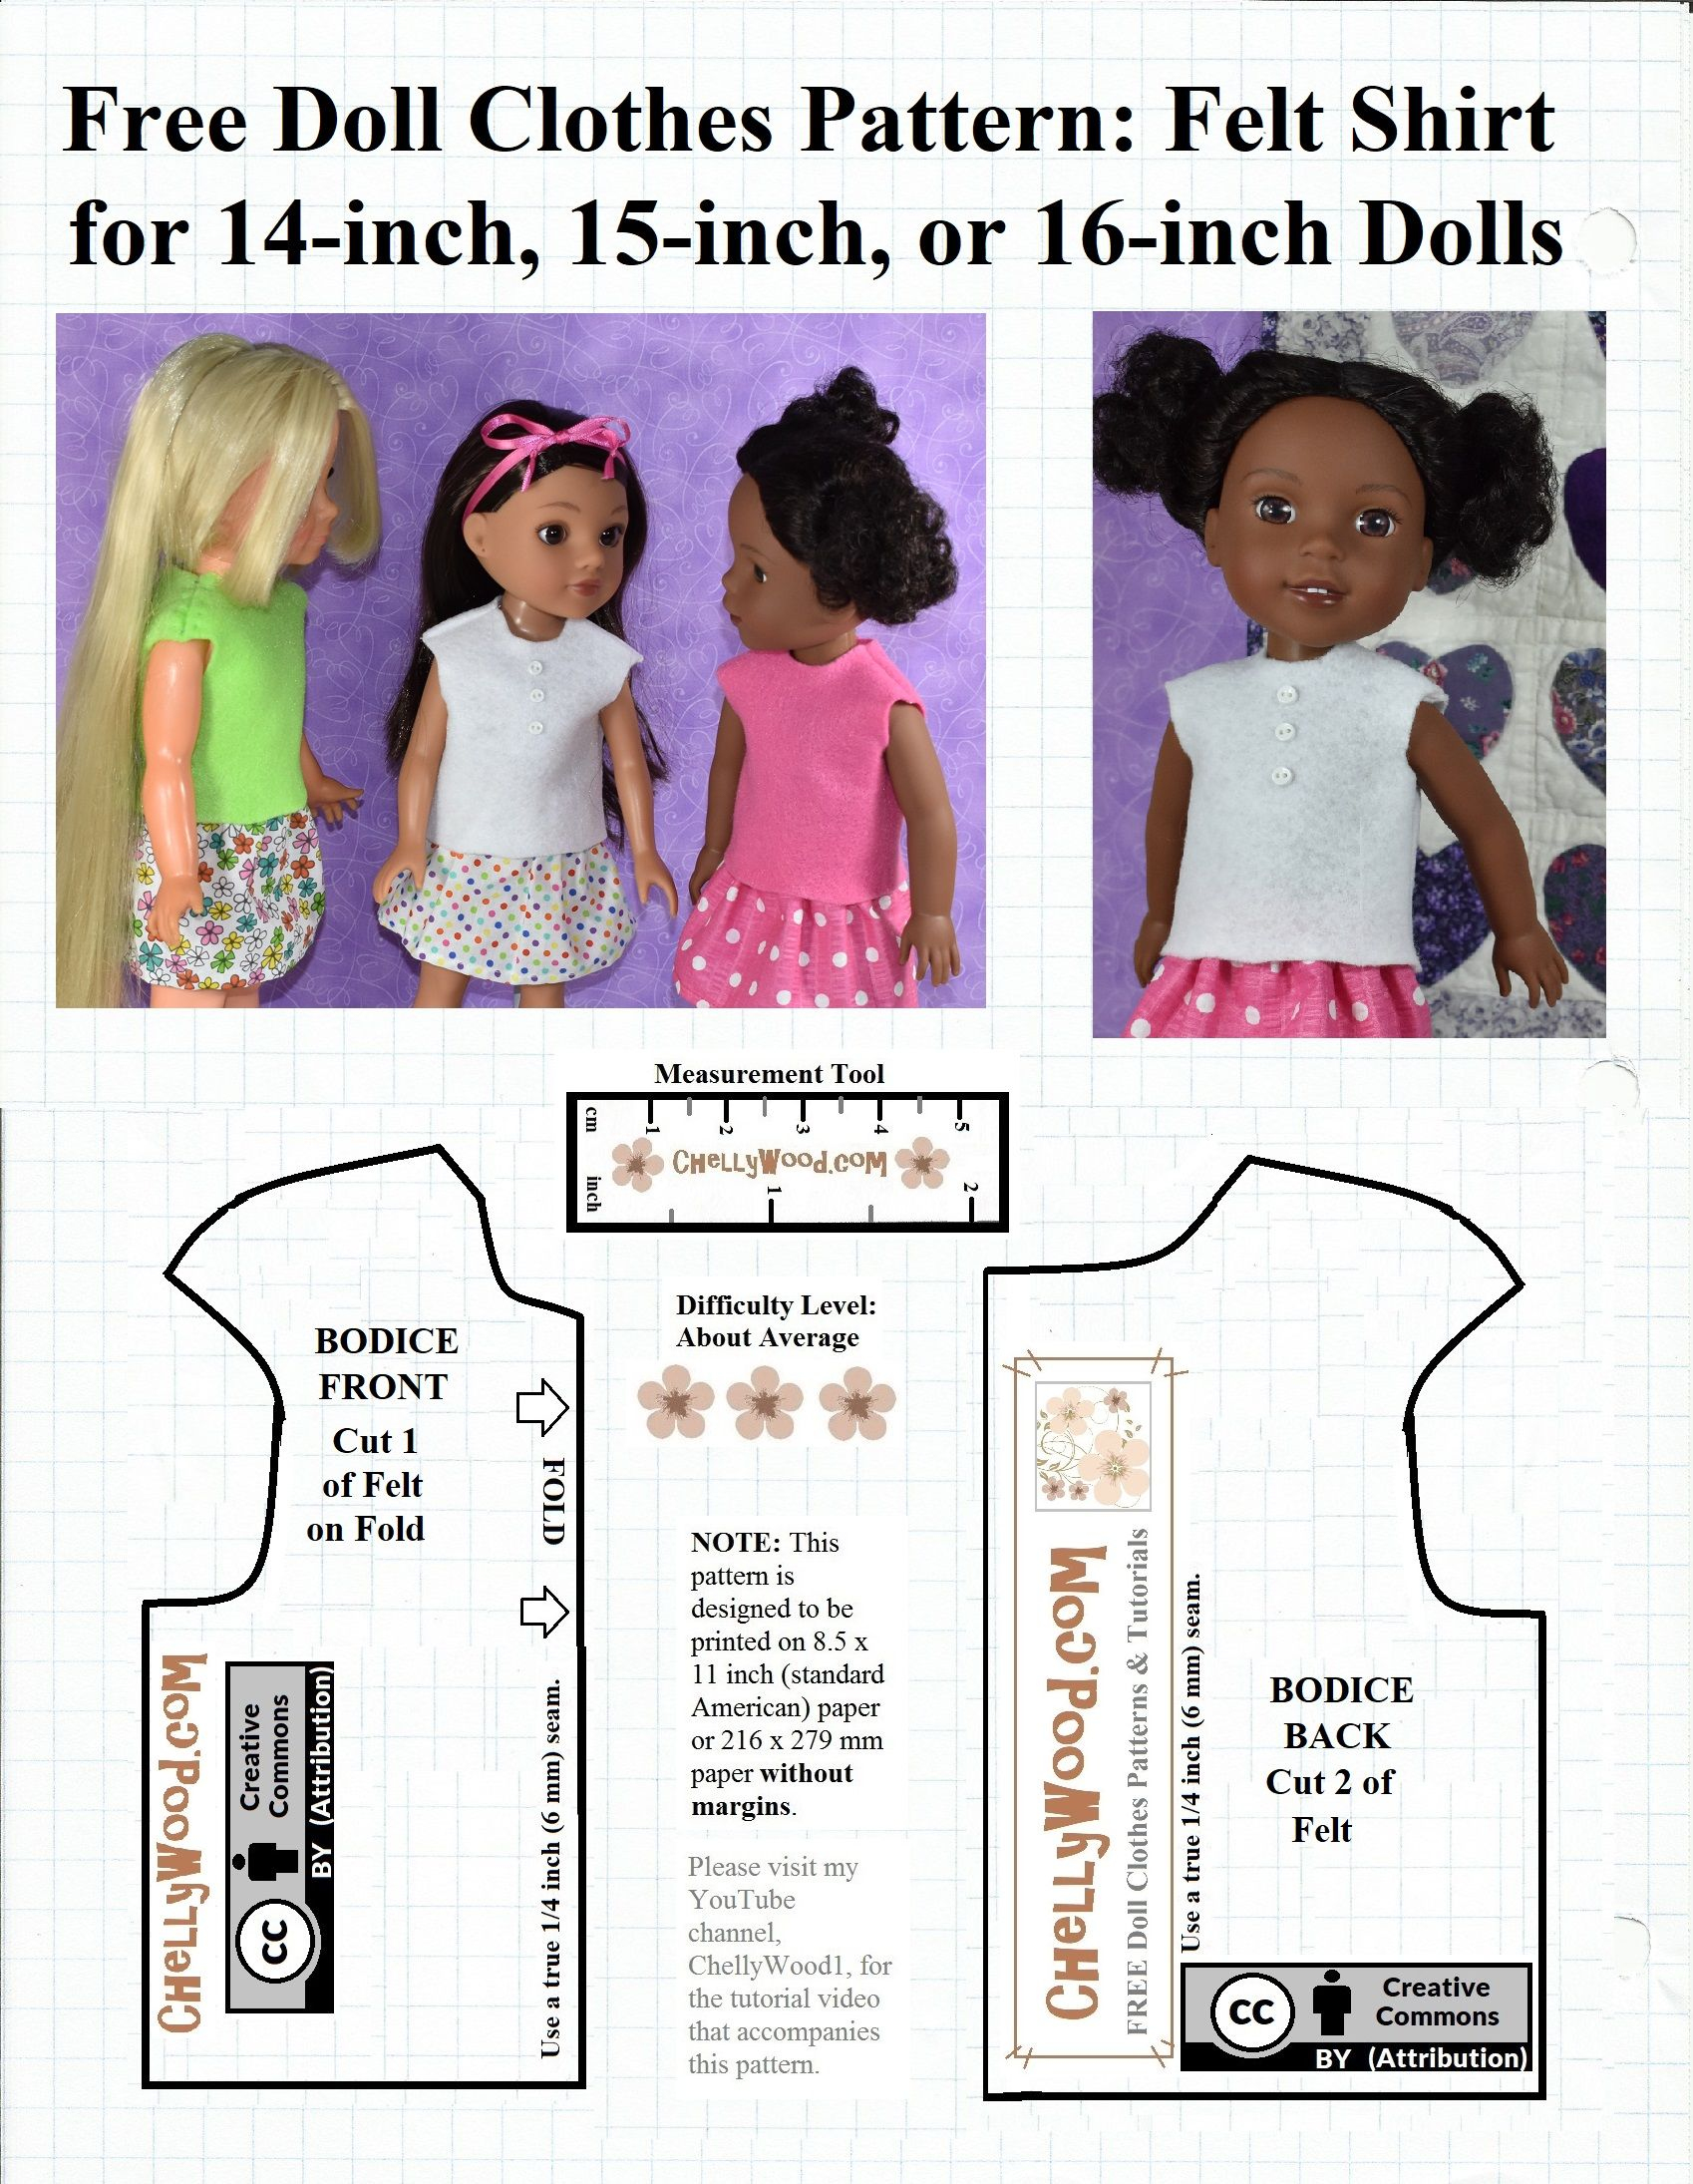 Free Printable Doll Clothes Sewing Patterns For Wellie Wishers H4H 